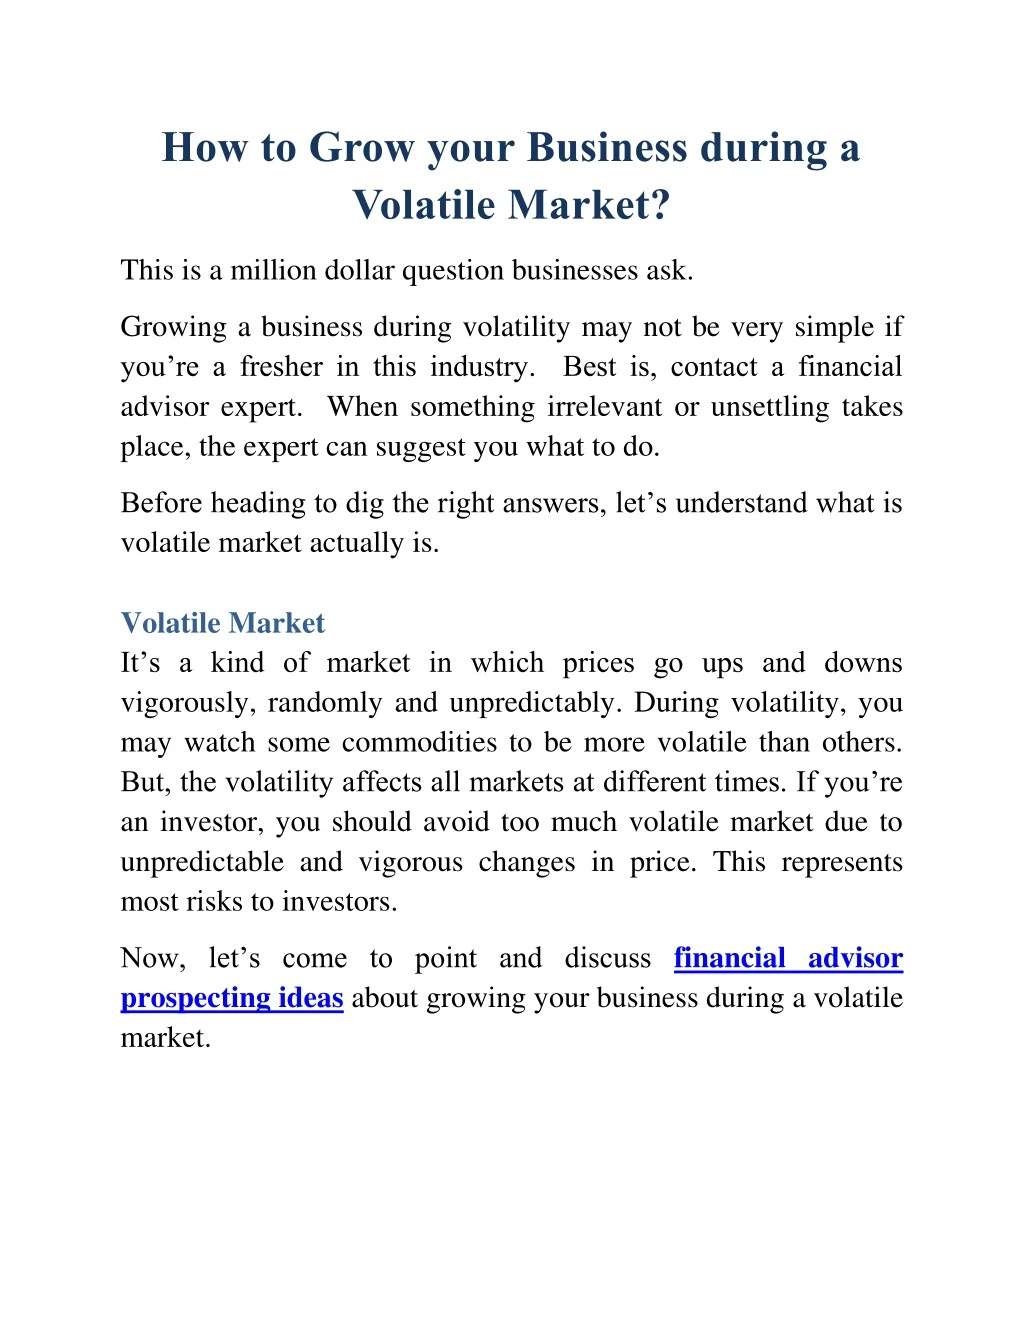 how to grow your business during a volatile market